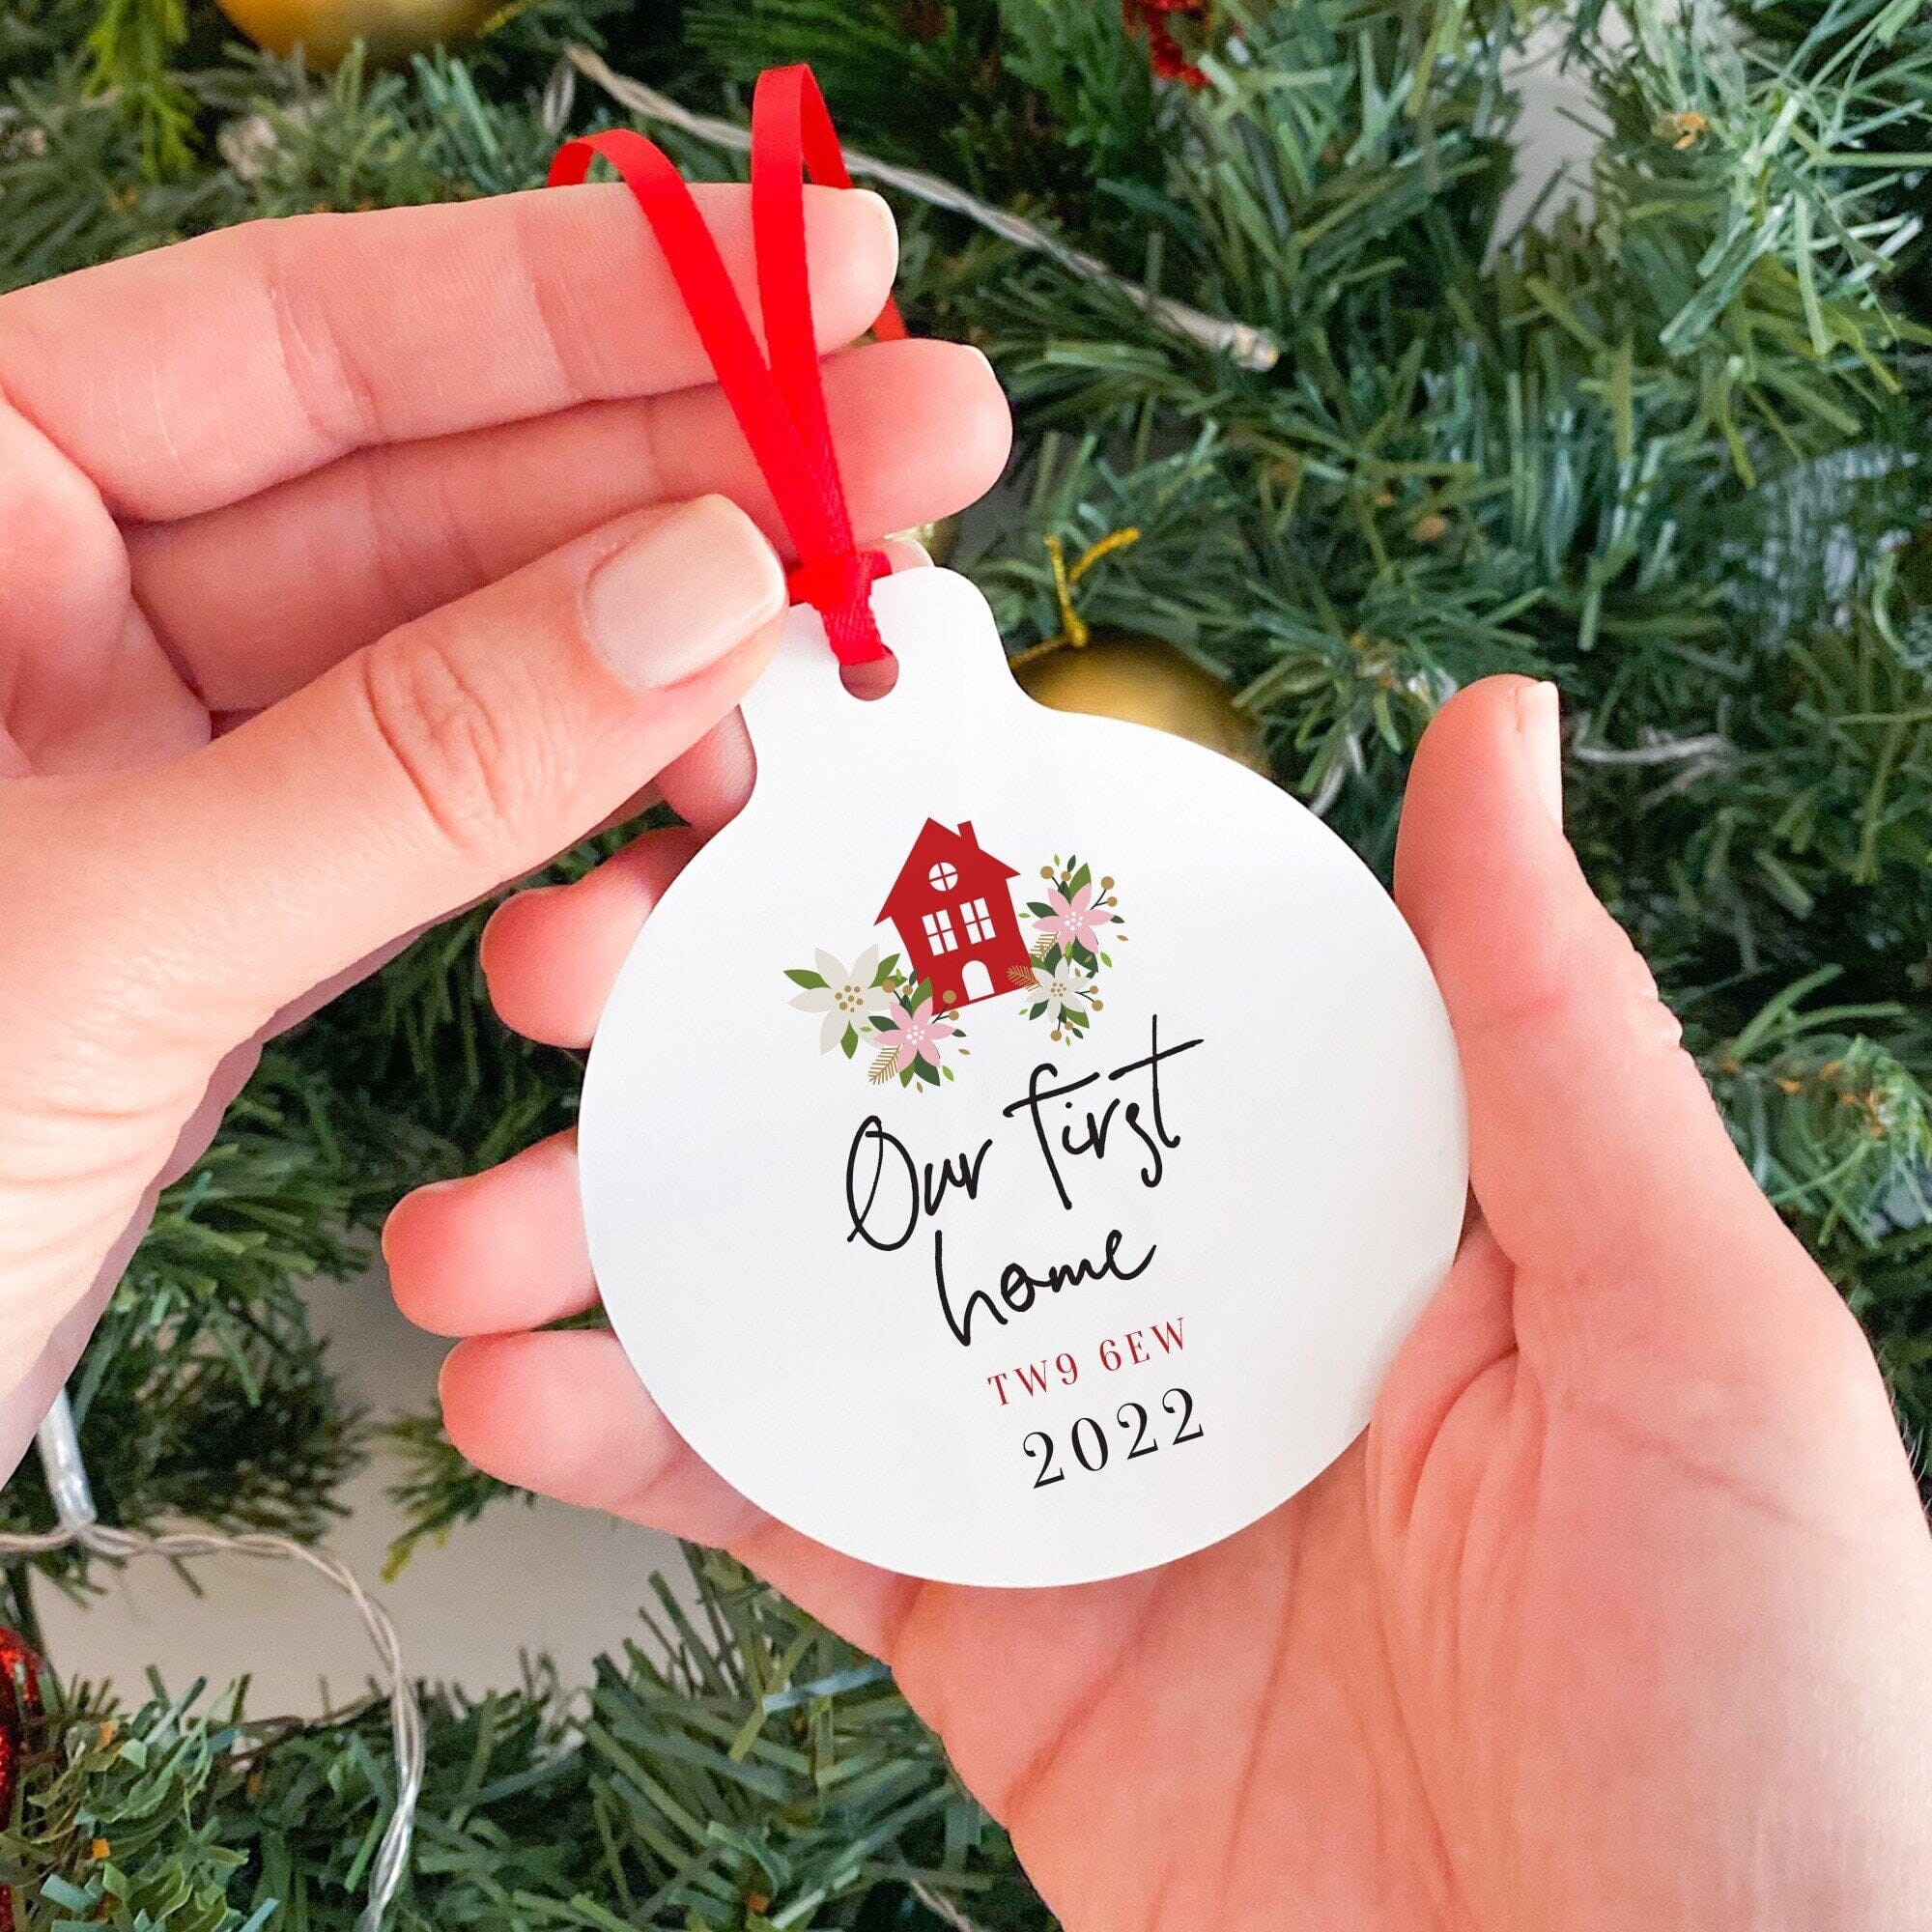 Our First Home Christmas Ornament With Postcode, Personalised New Home Xmas Décor